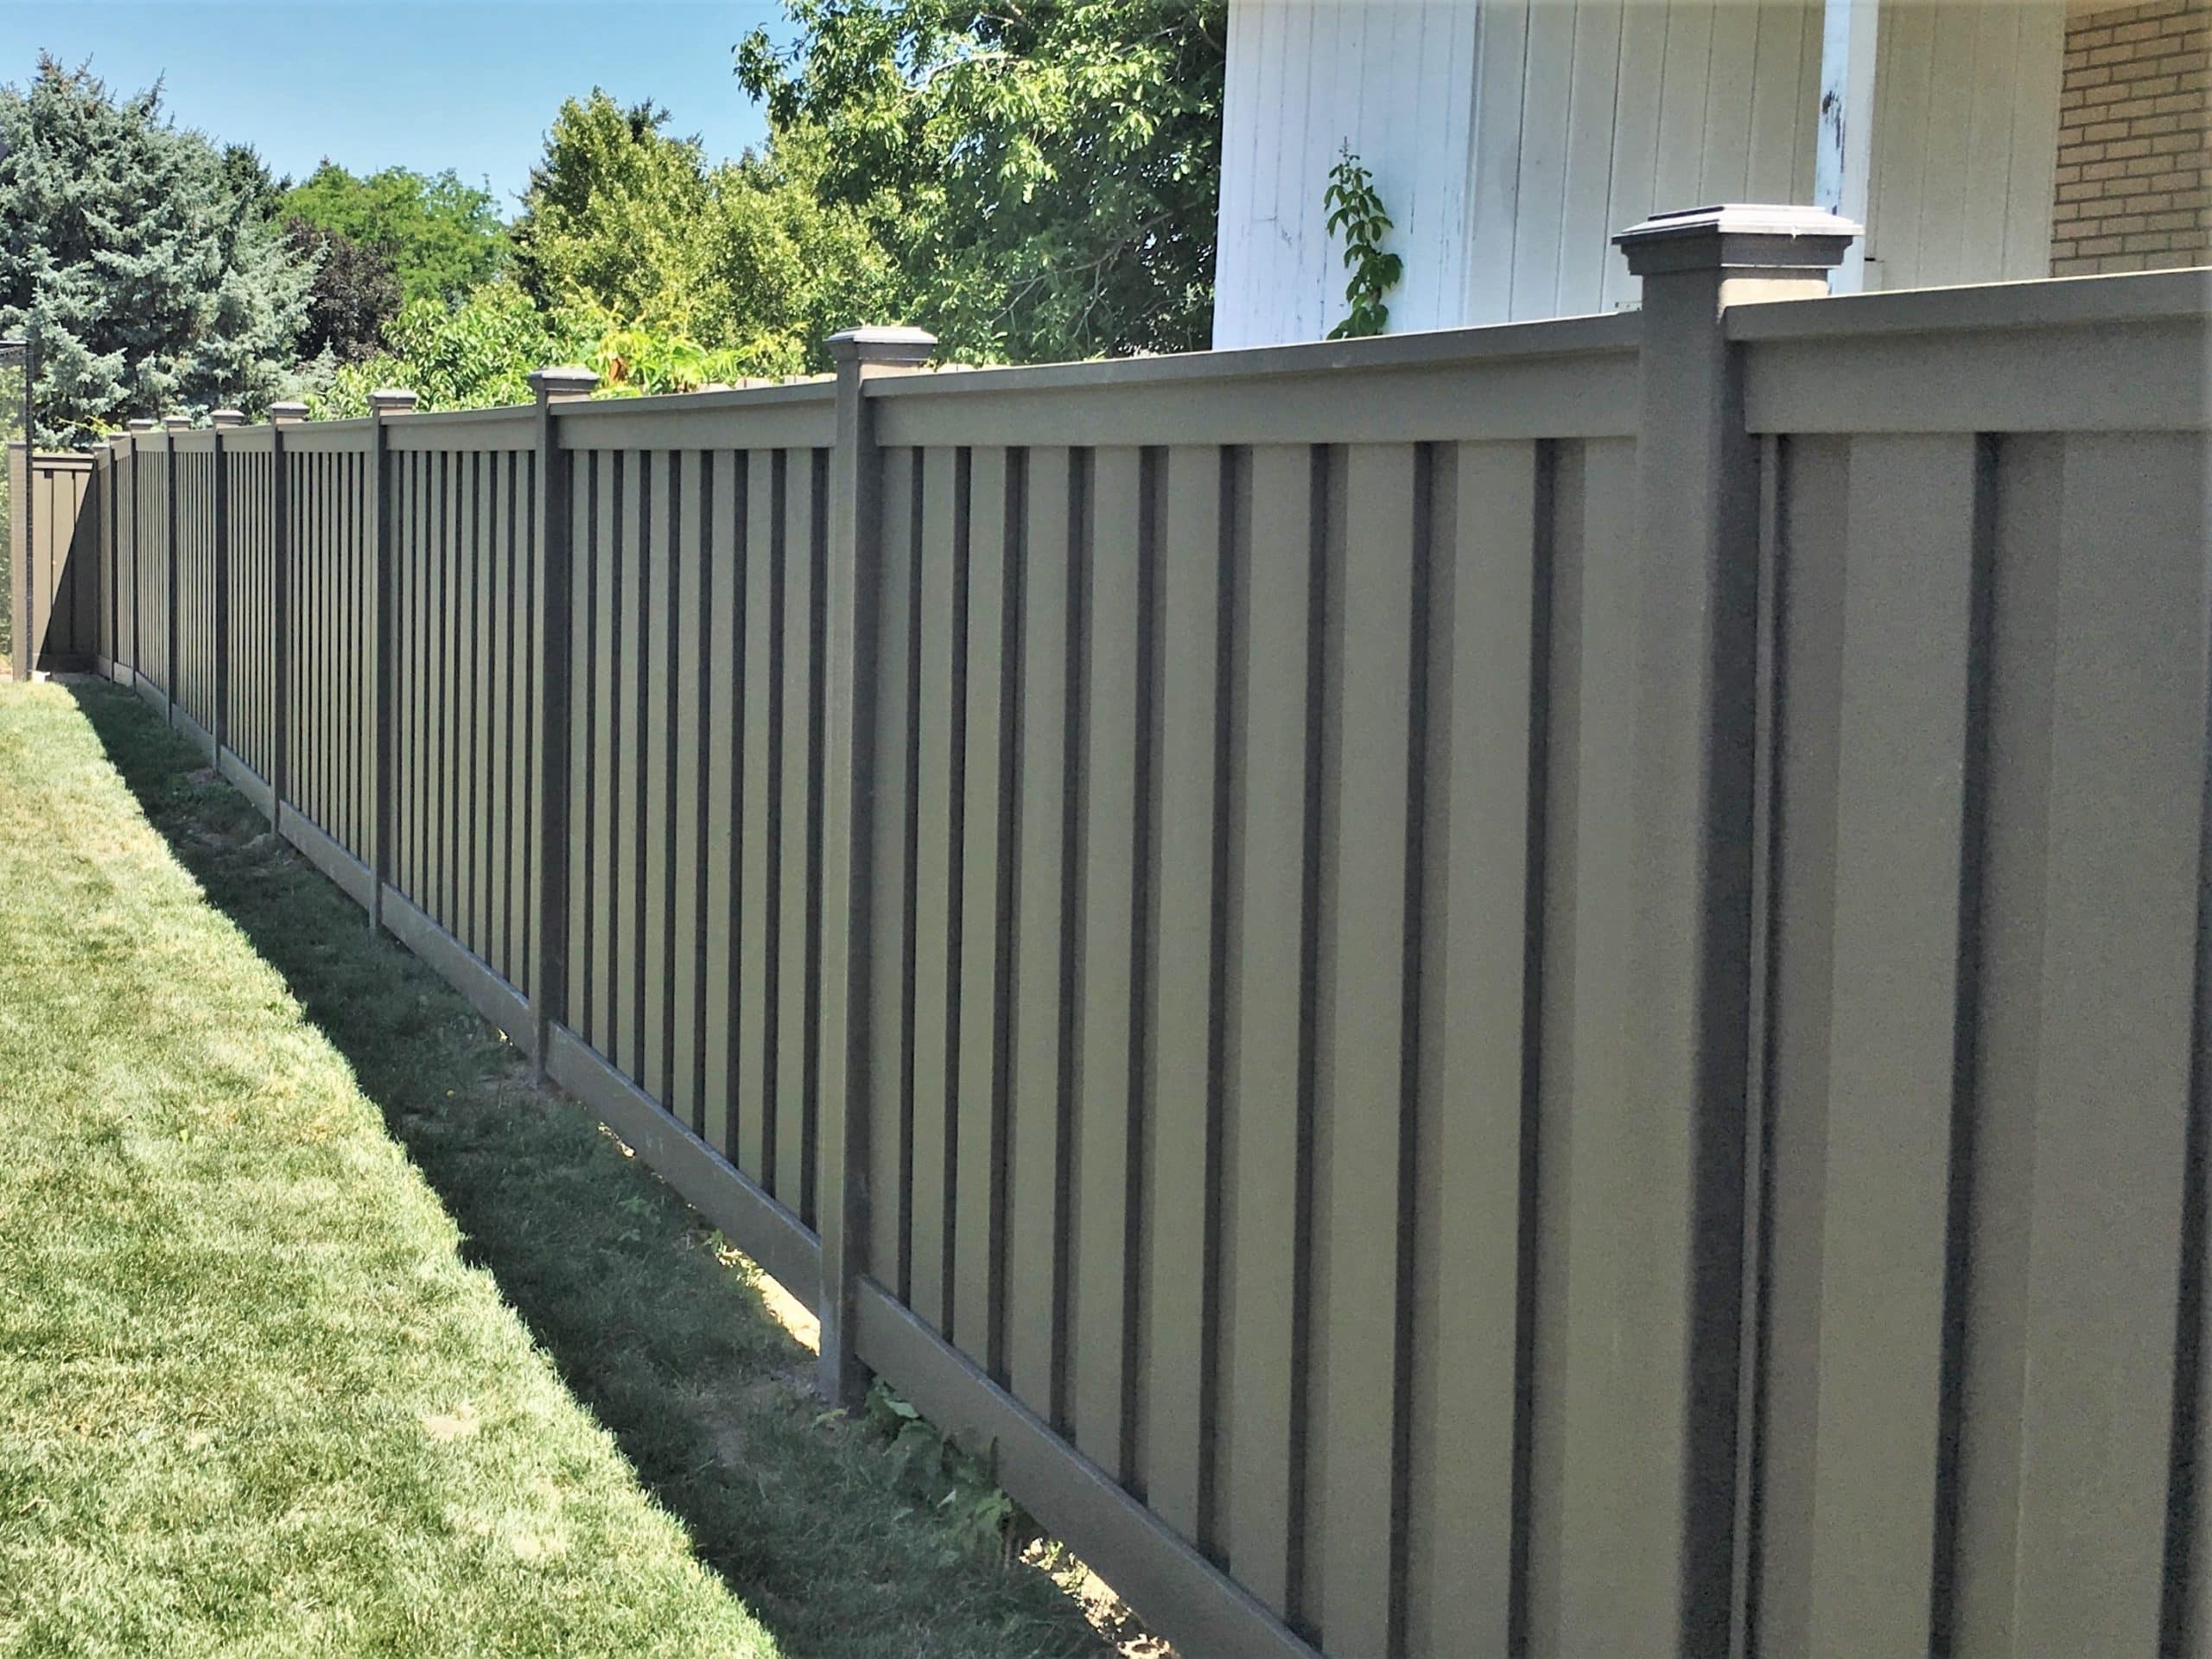 Fence panels made of Trex Seclusions privacy fencing installed along the property line of a backyard.